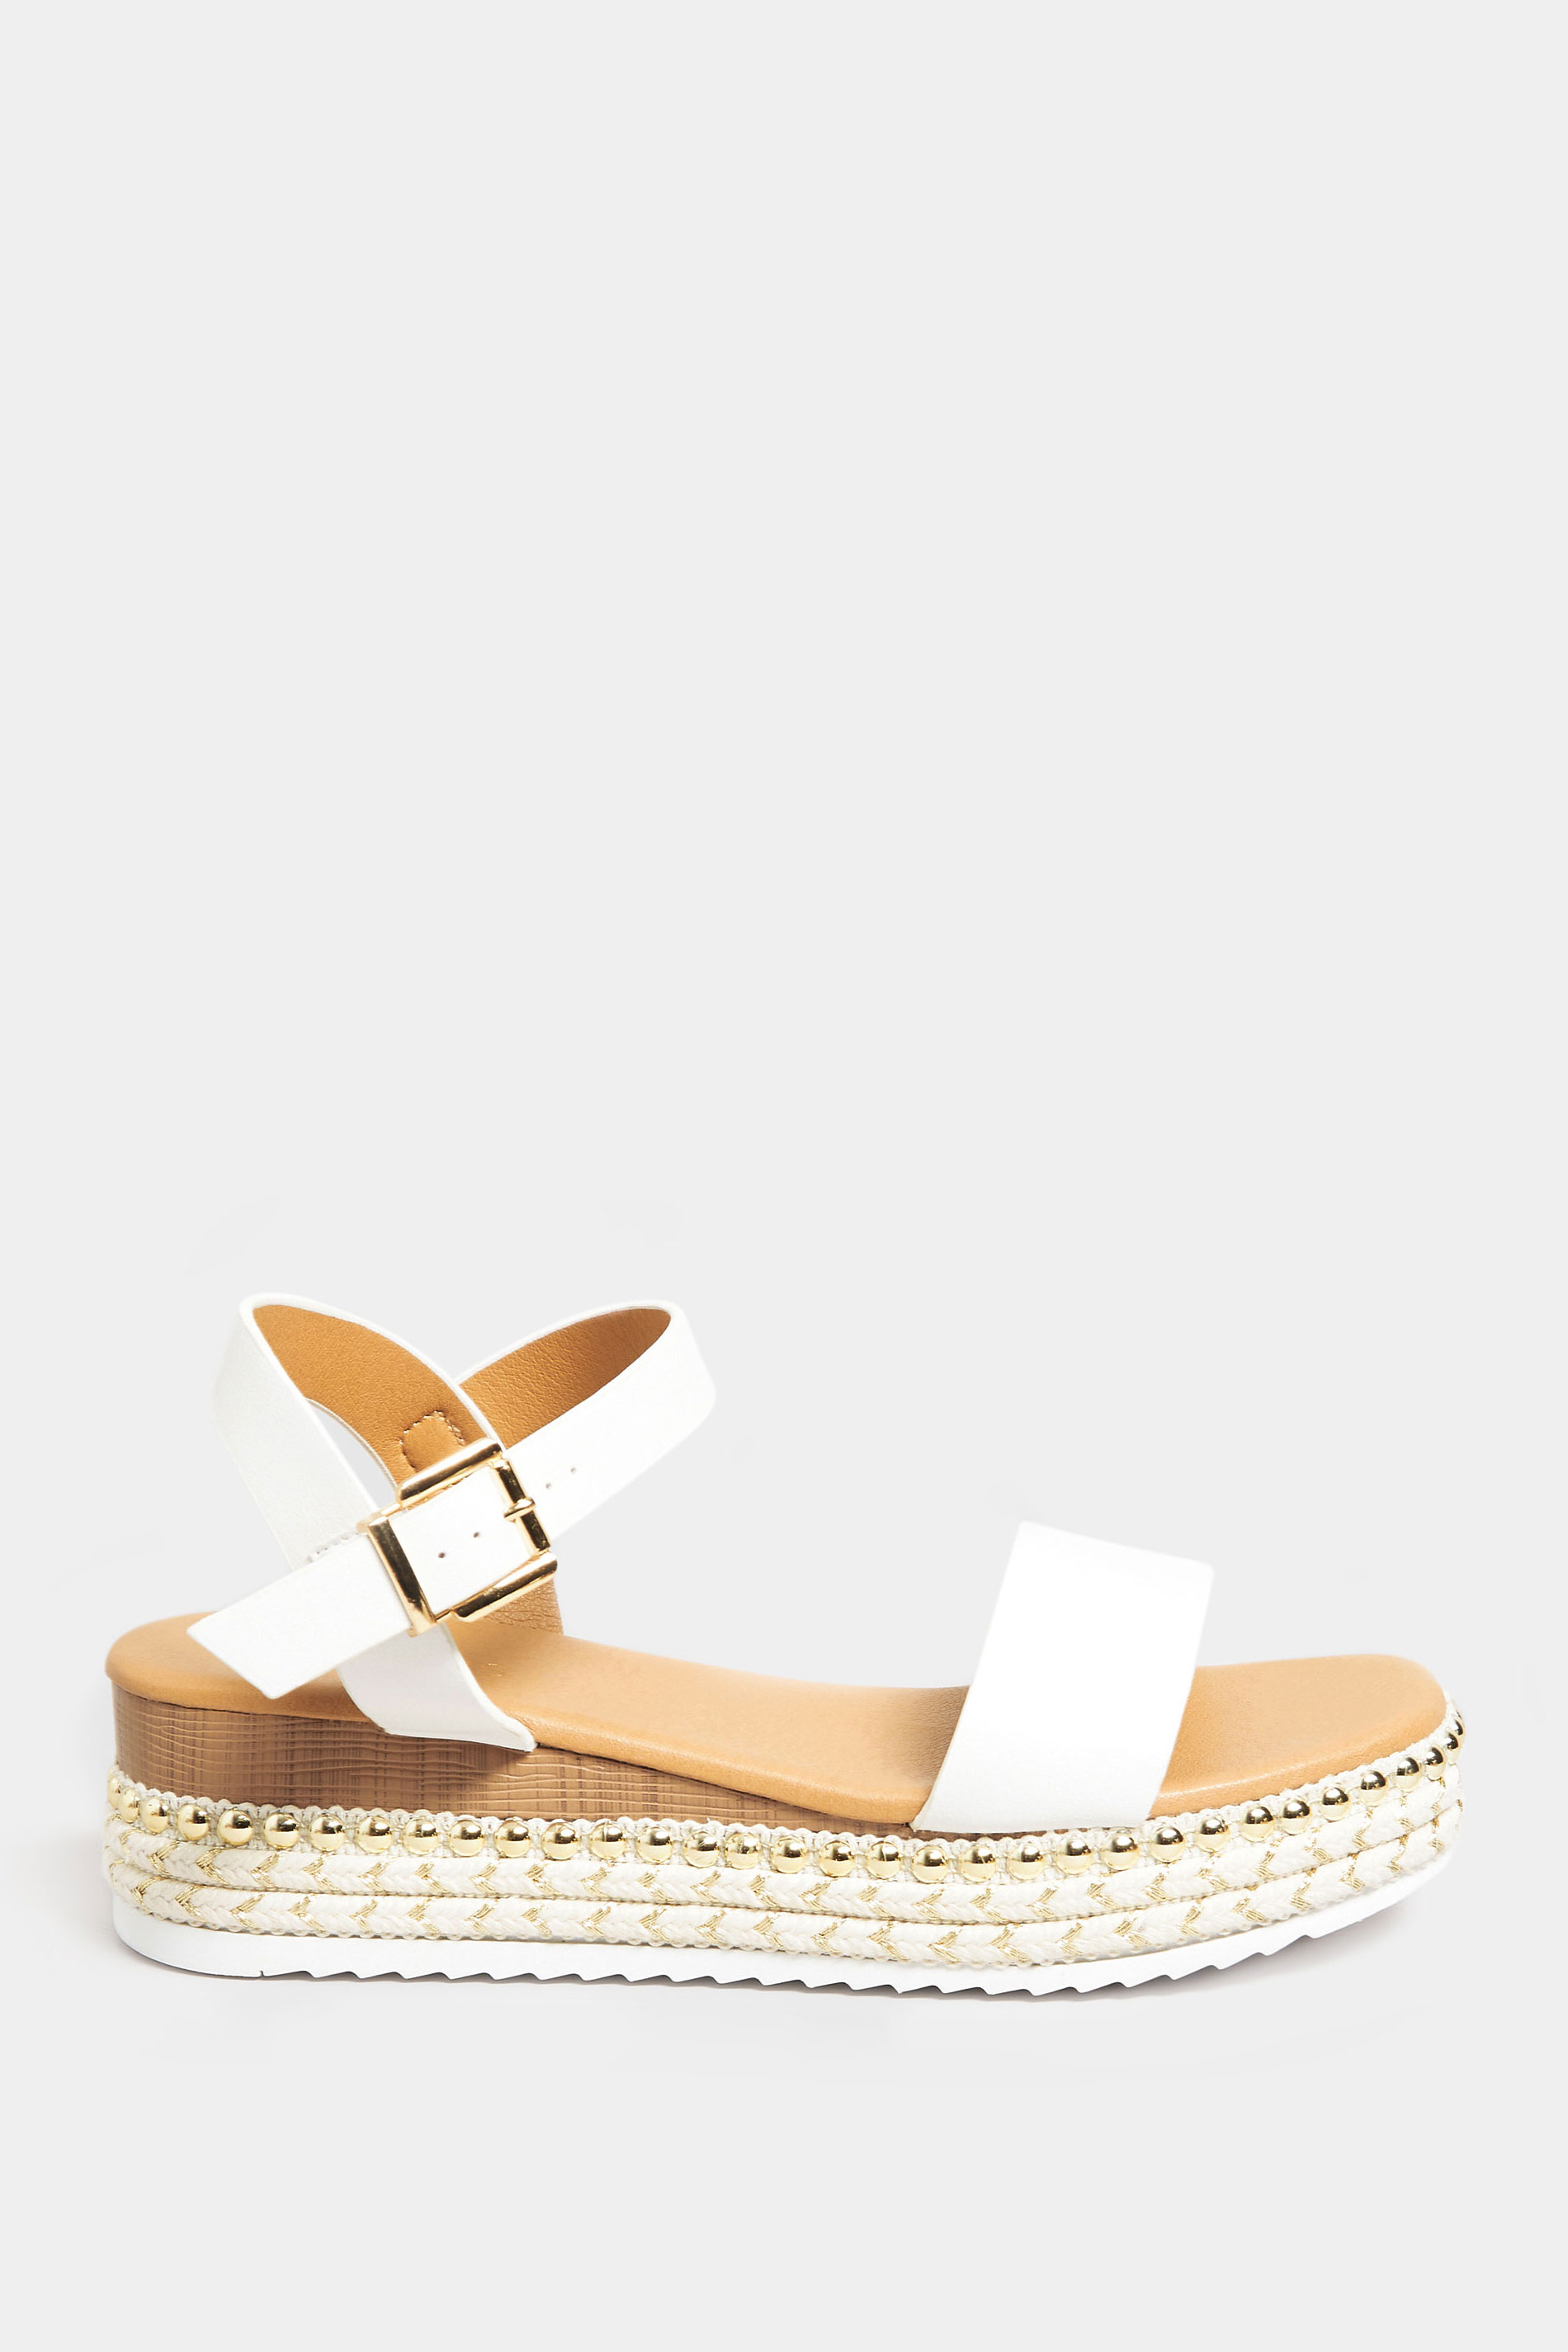 Plus Size White & Brown Buckle Platform Espadrille Wedge Heels | Yours Clothing  3